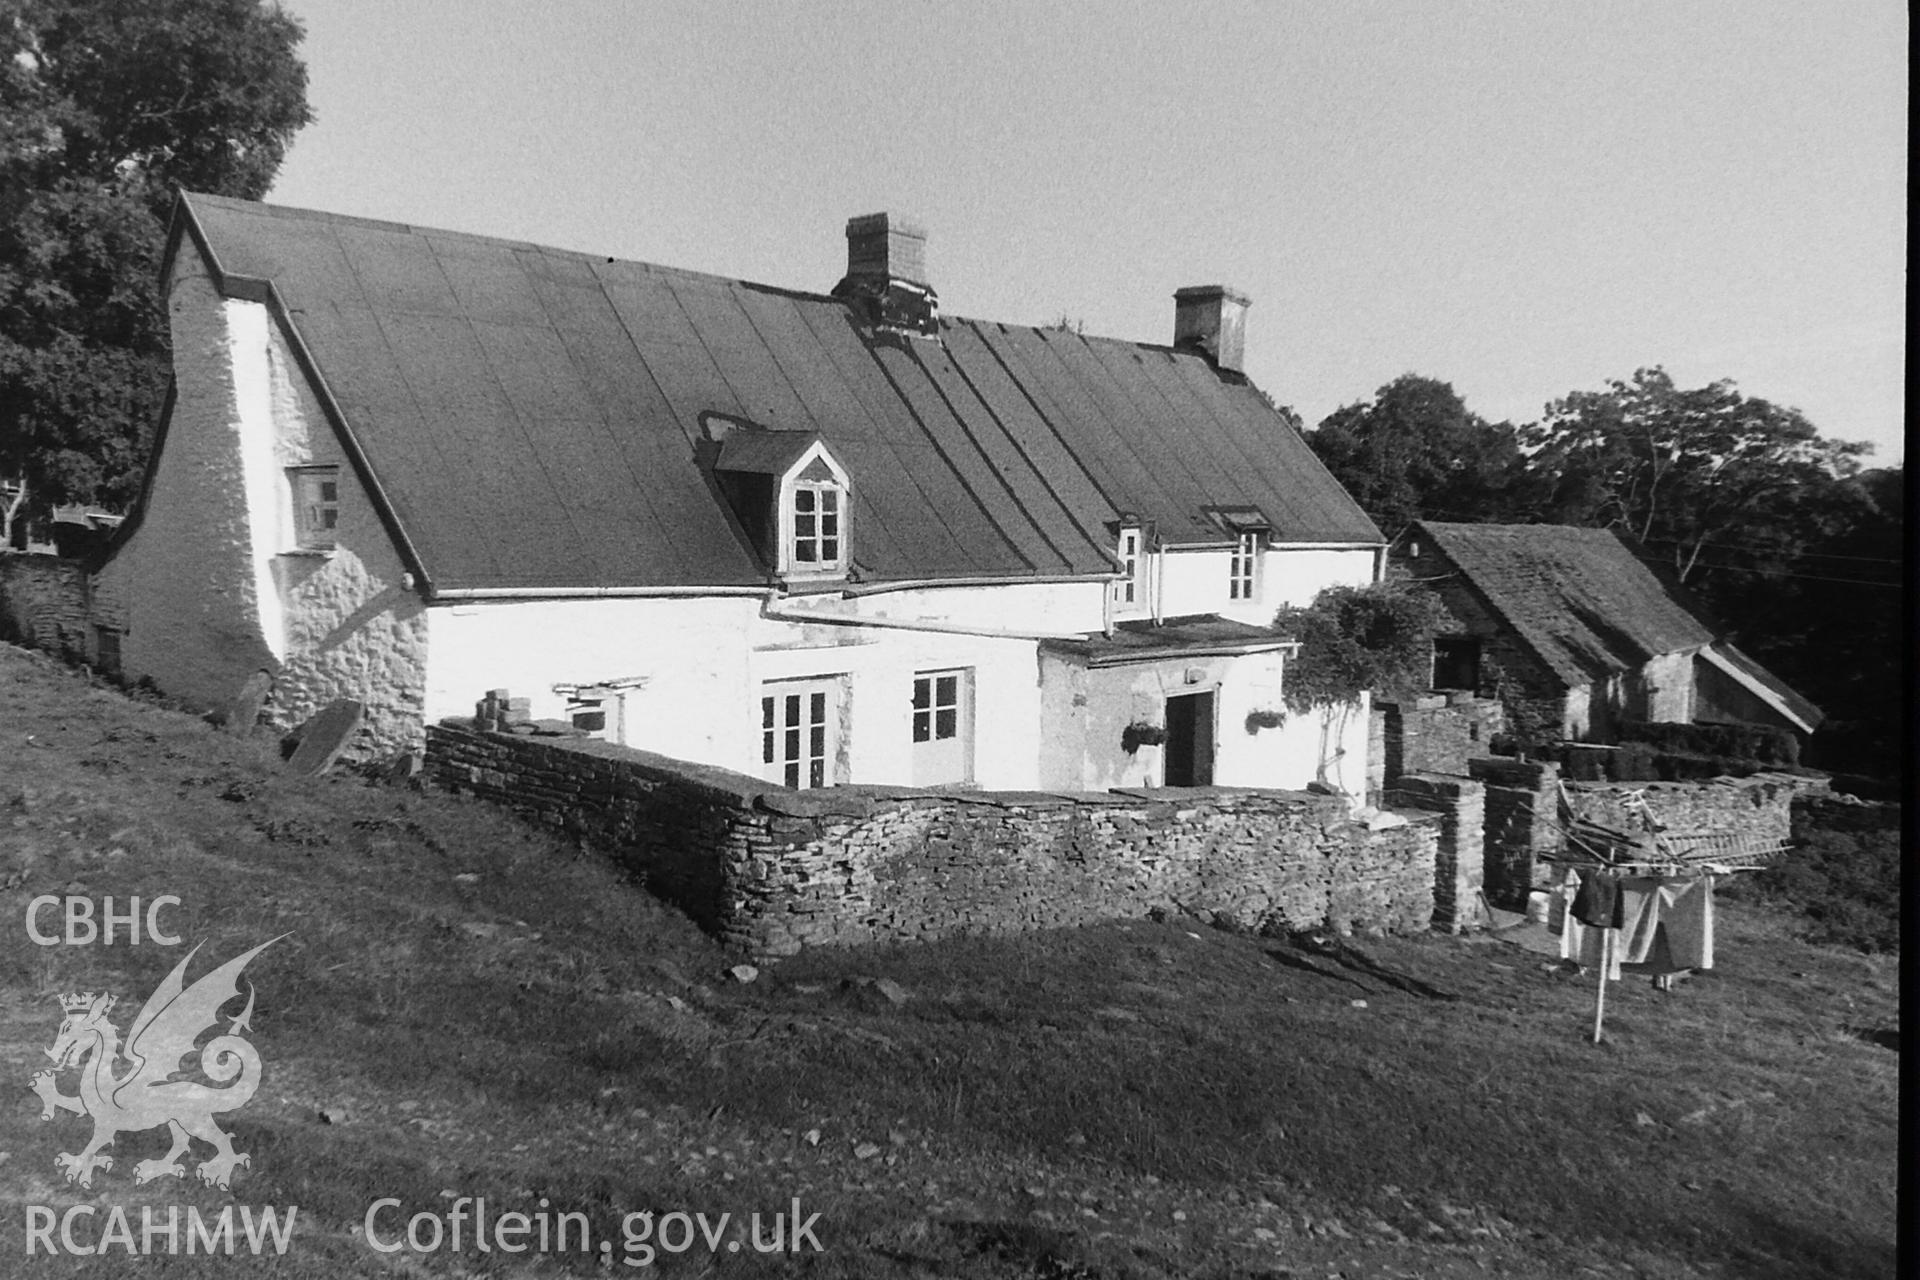 Black and white photo showing Rhyswg Fawr, taken by Paul R. Davis, undated.